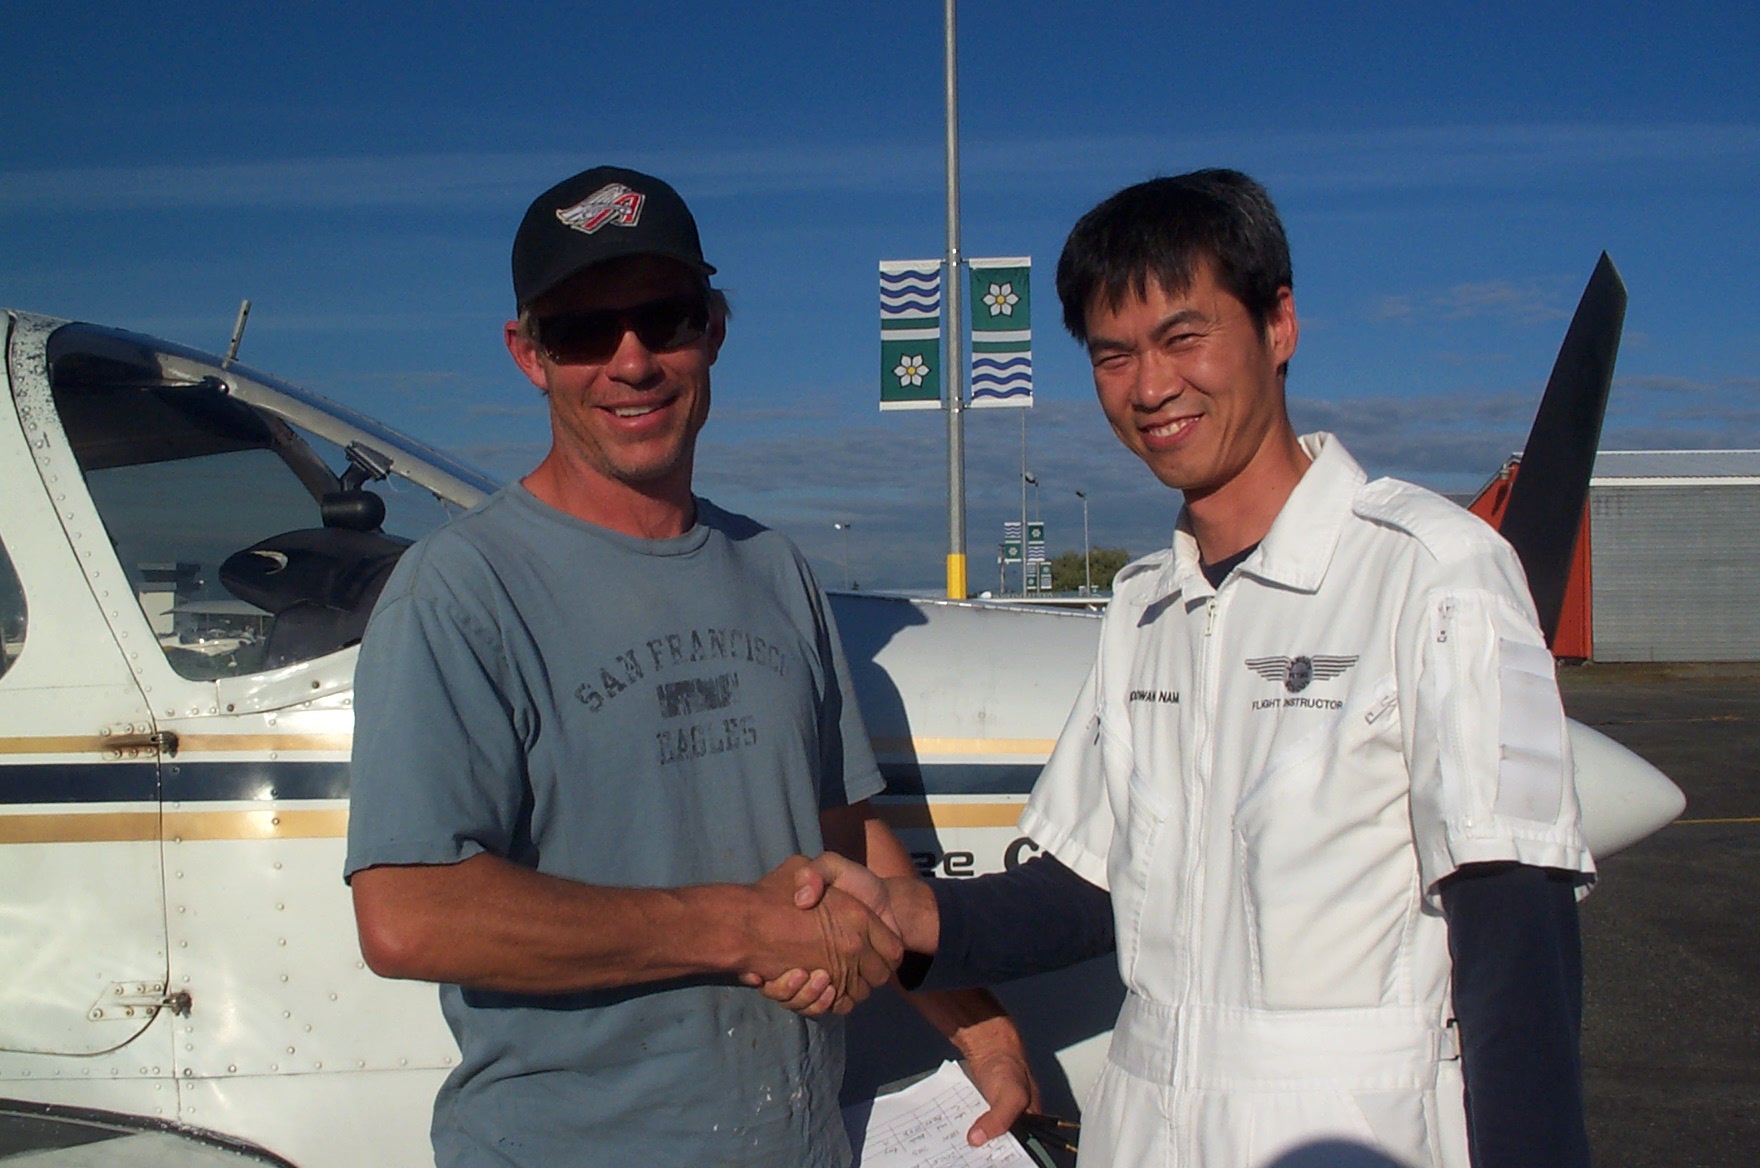 Darryl (Mark) Reid is congratulated by Flight Instructor Hoowan Nam after the completion of Mark's Second/First Solo Flight in Cherokee GCEP on September 22, 2010. Langley Flying School.